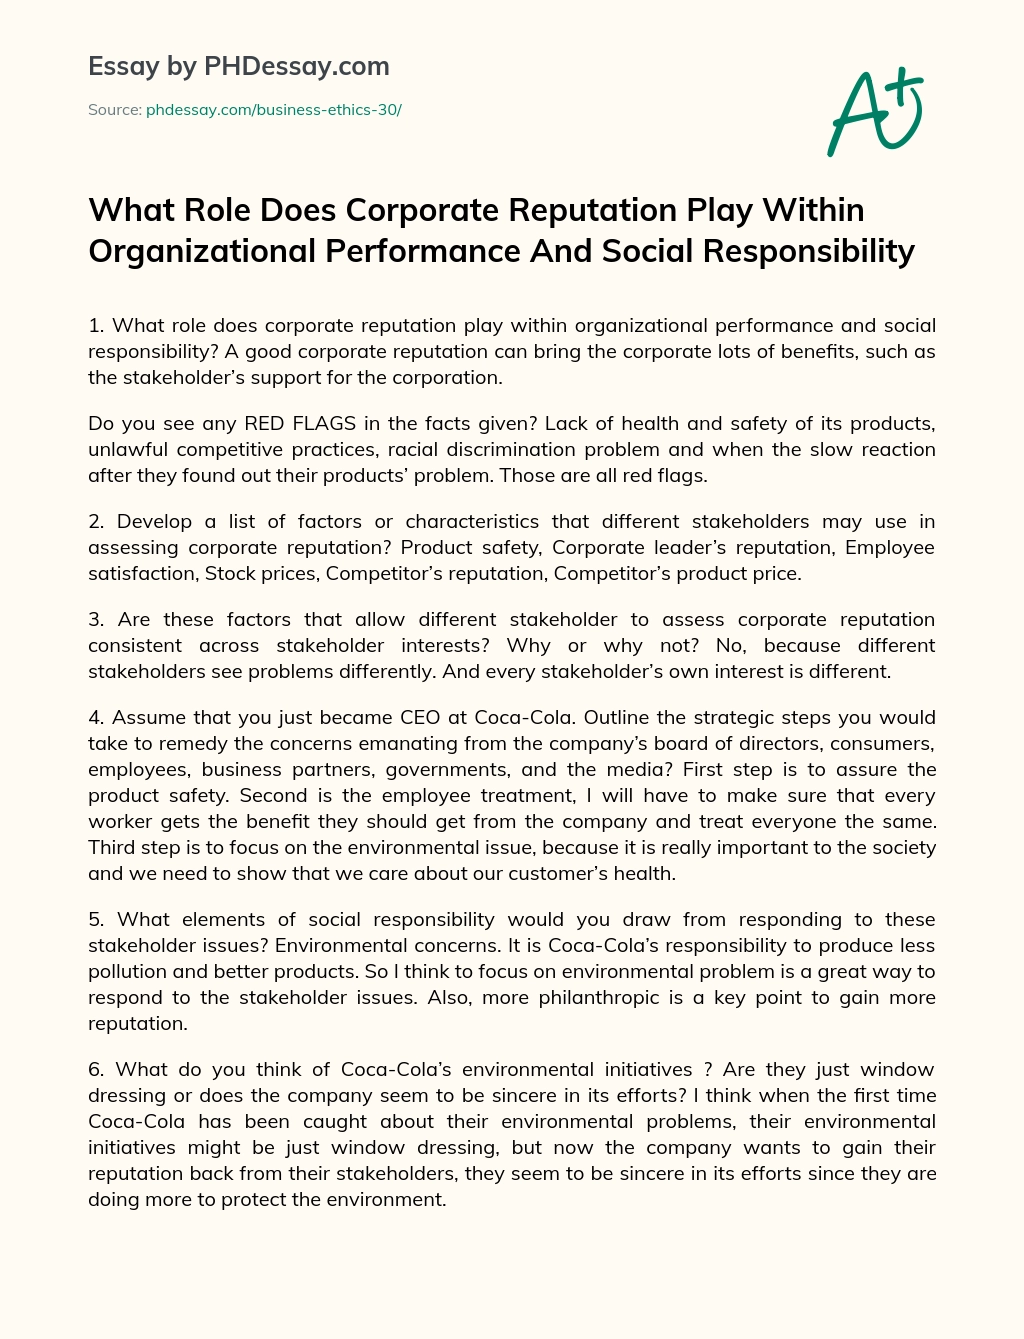 What role does corporate reputation play within organizational performance and social responsibility essay